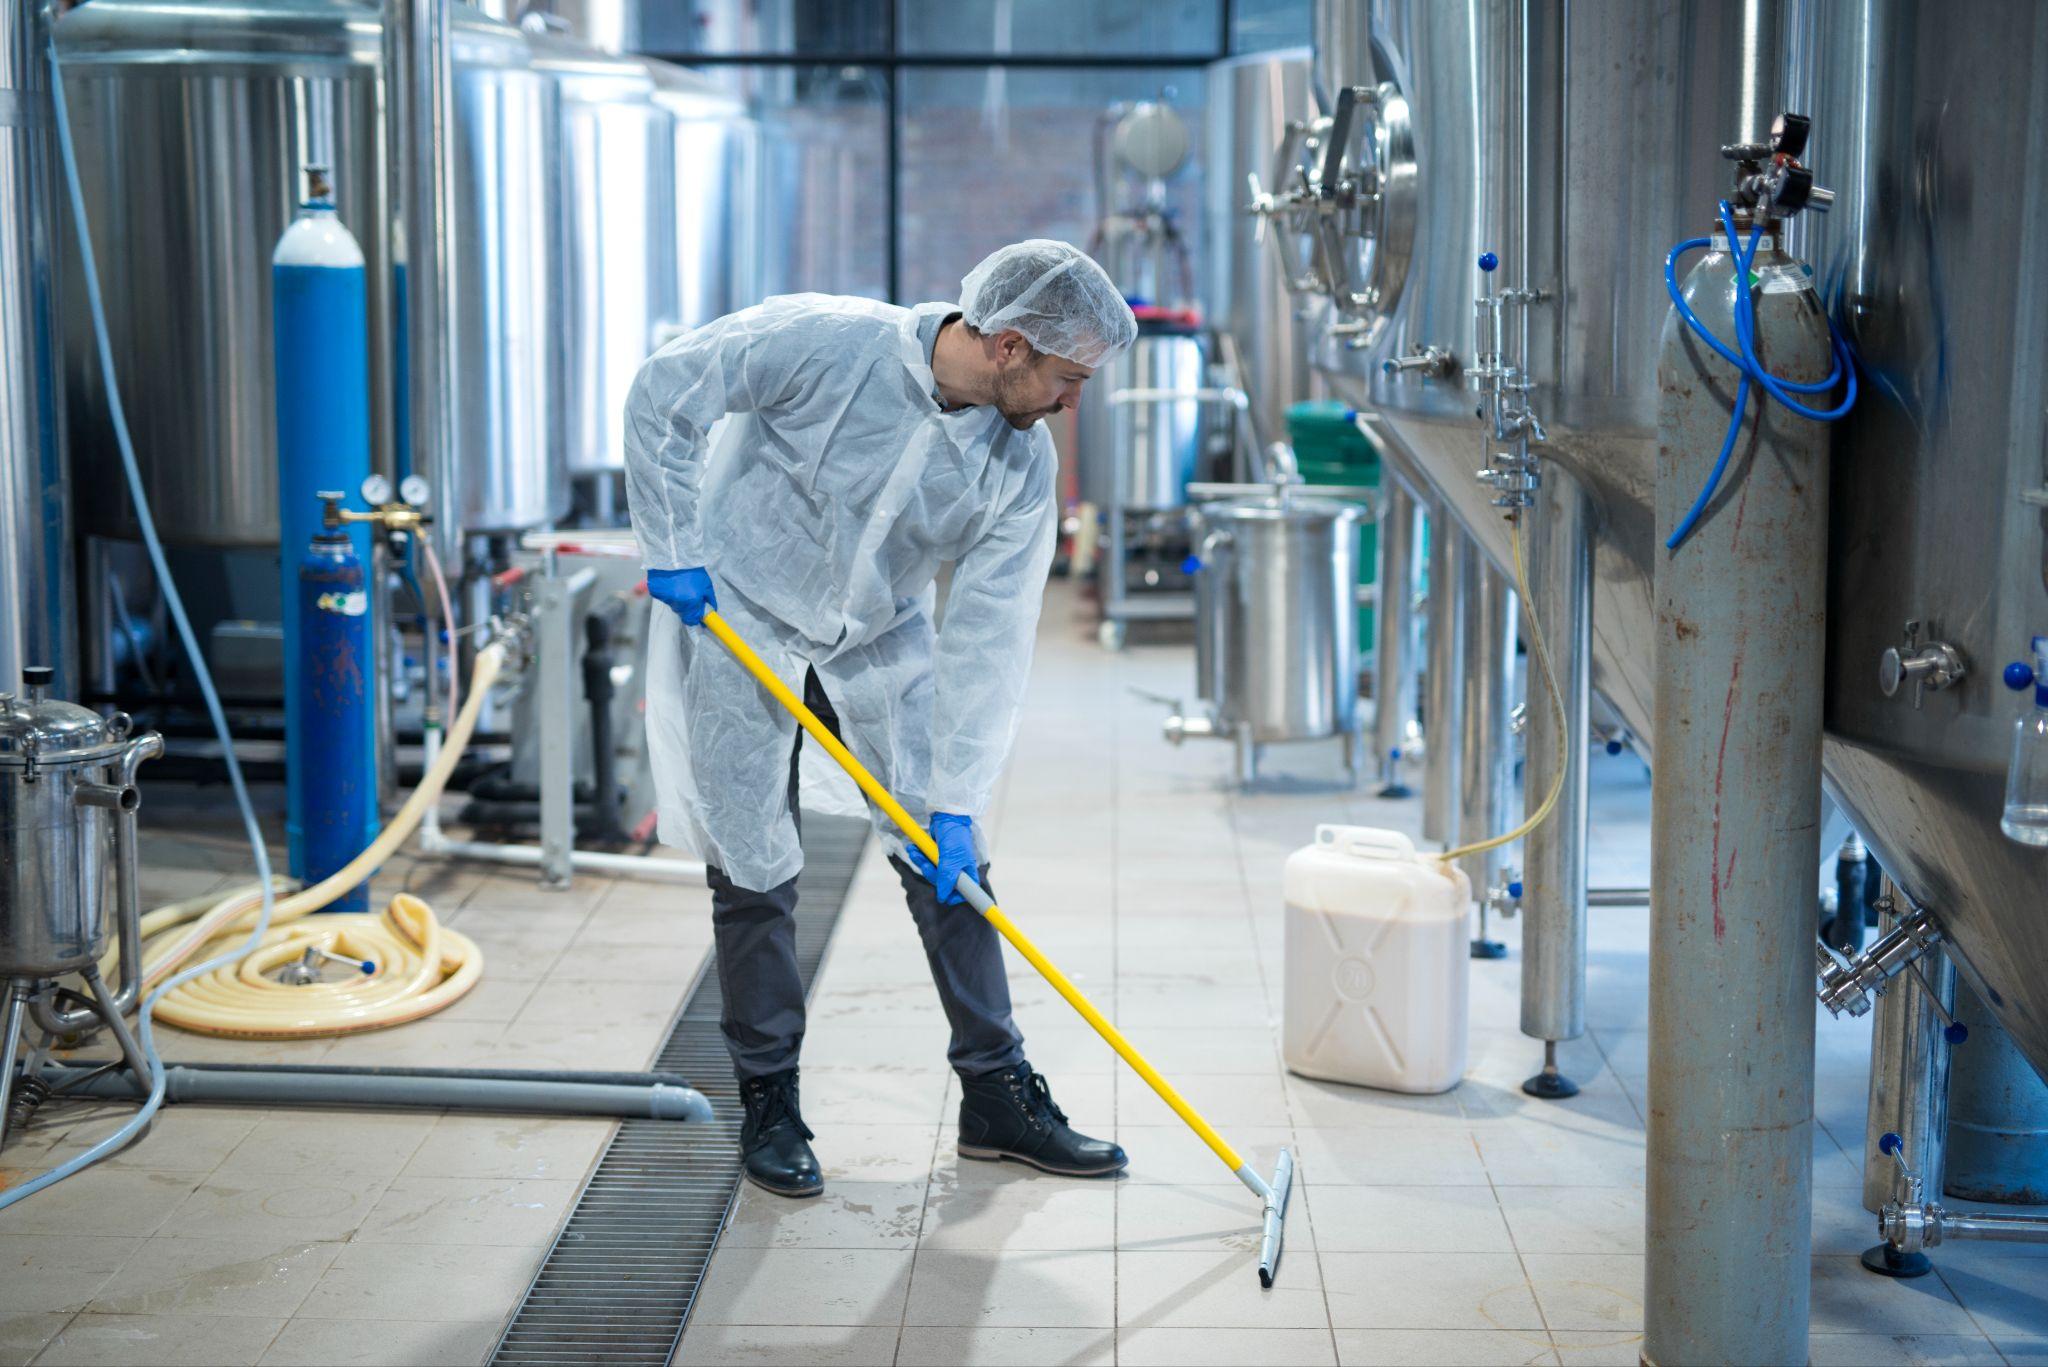 A man wearing a cleaning uniform mops the floor of an industrial room. The room appears to have specialized equipment and machinery